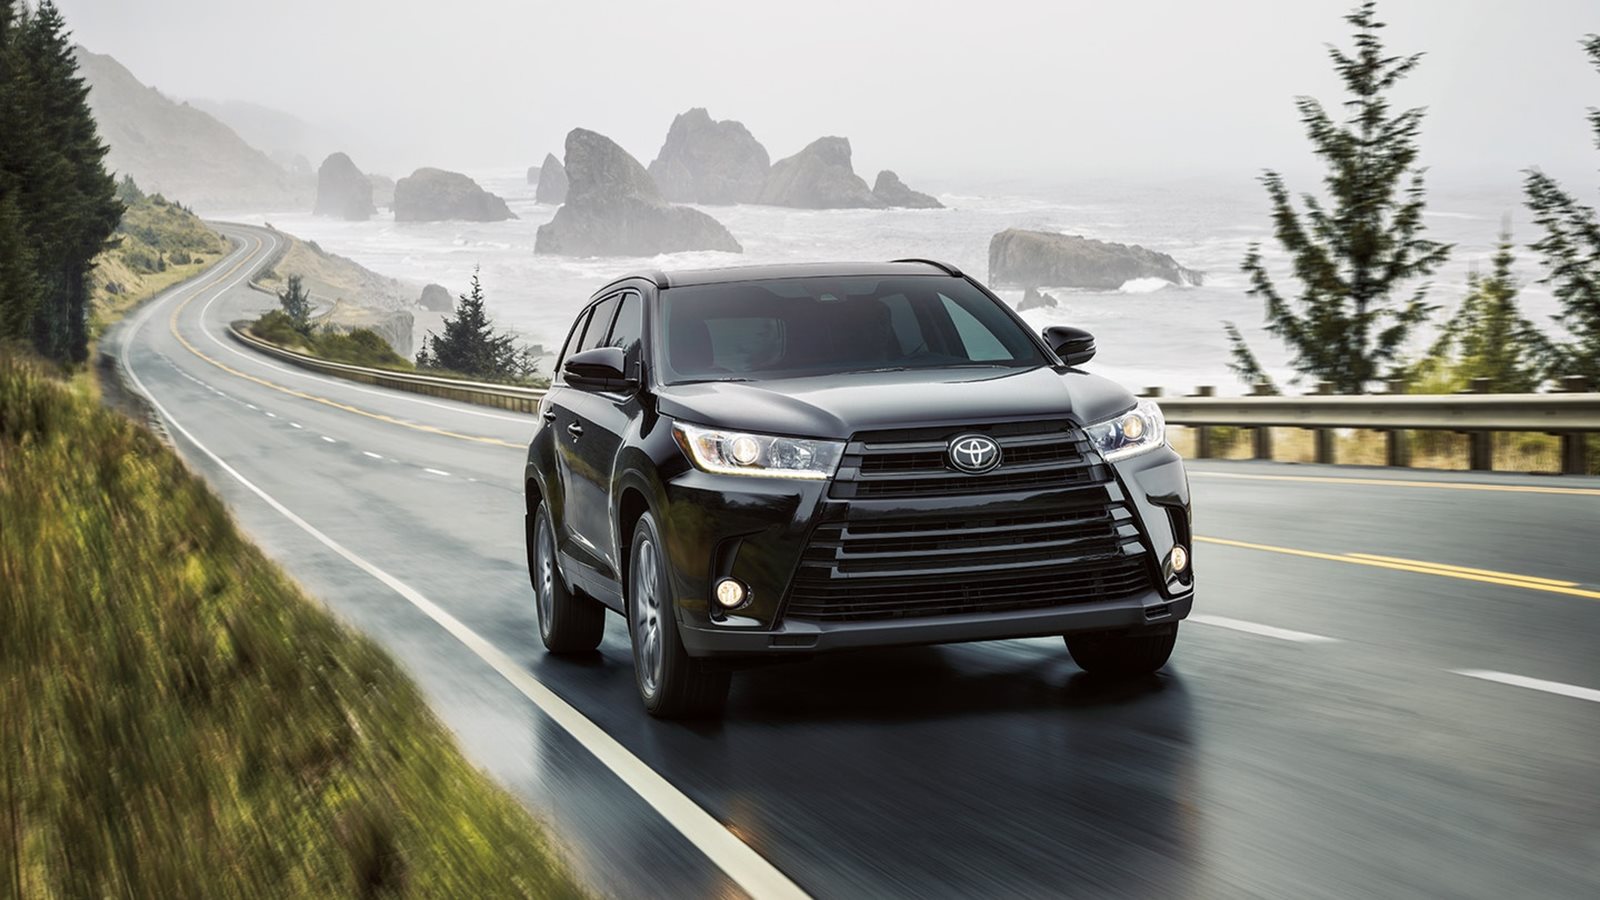 2017 Toyota Highlander Hybrid Front View Driving